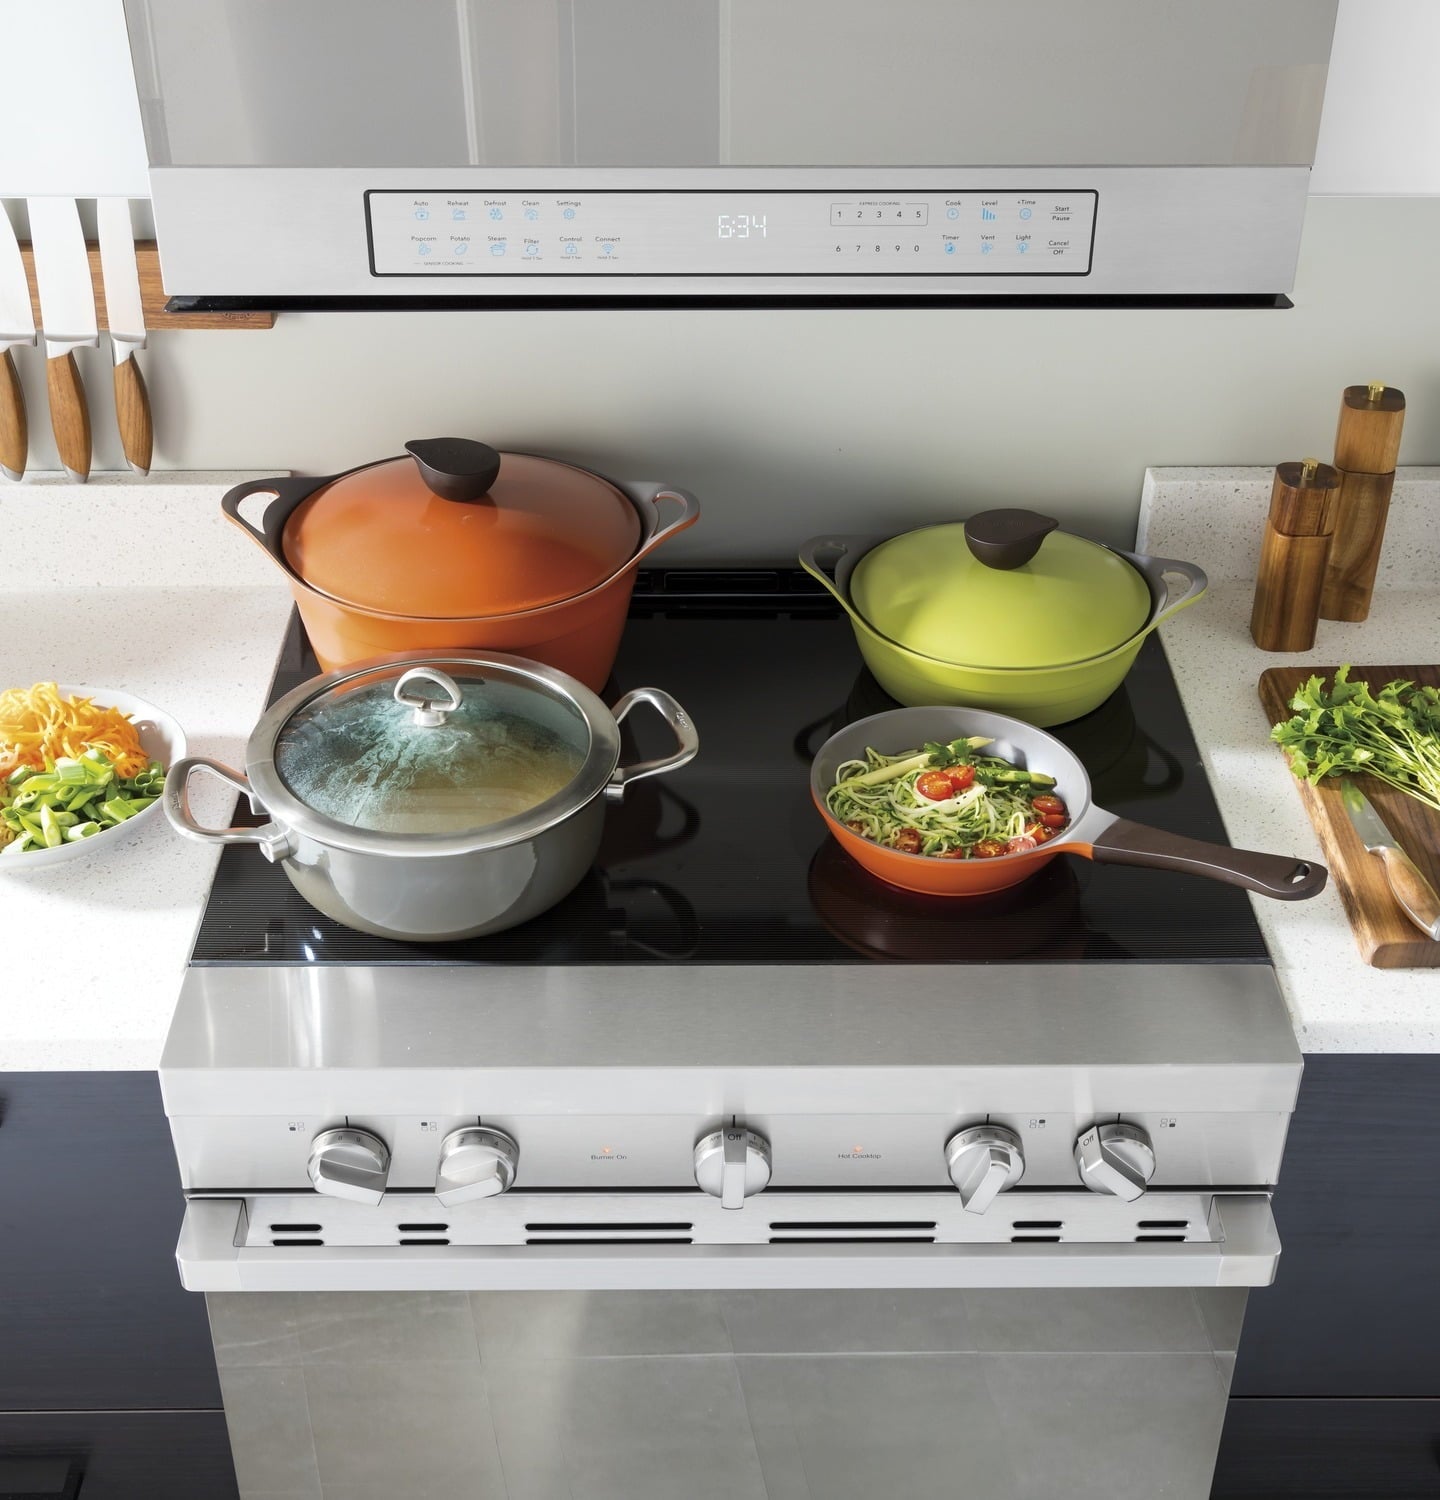 Haier Gas Range and Cooktop - Using a Wok